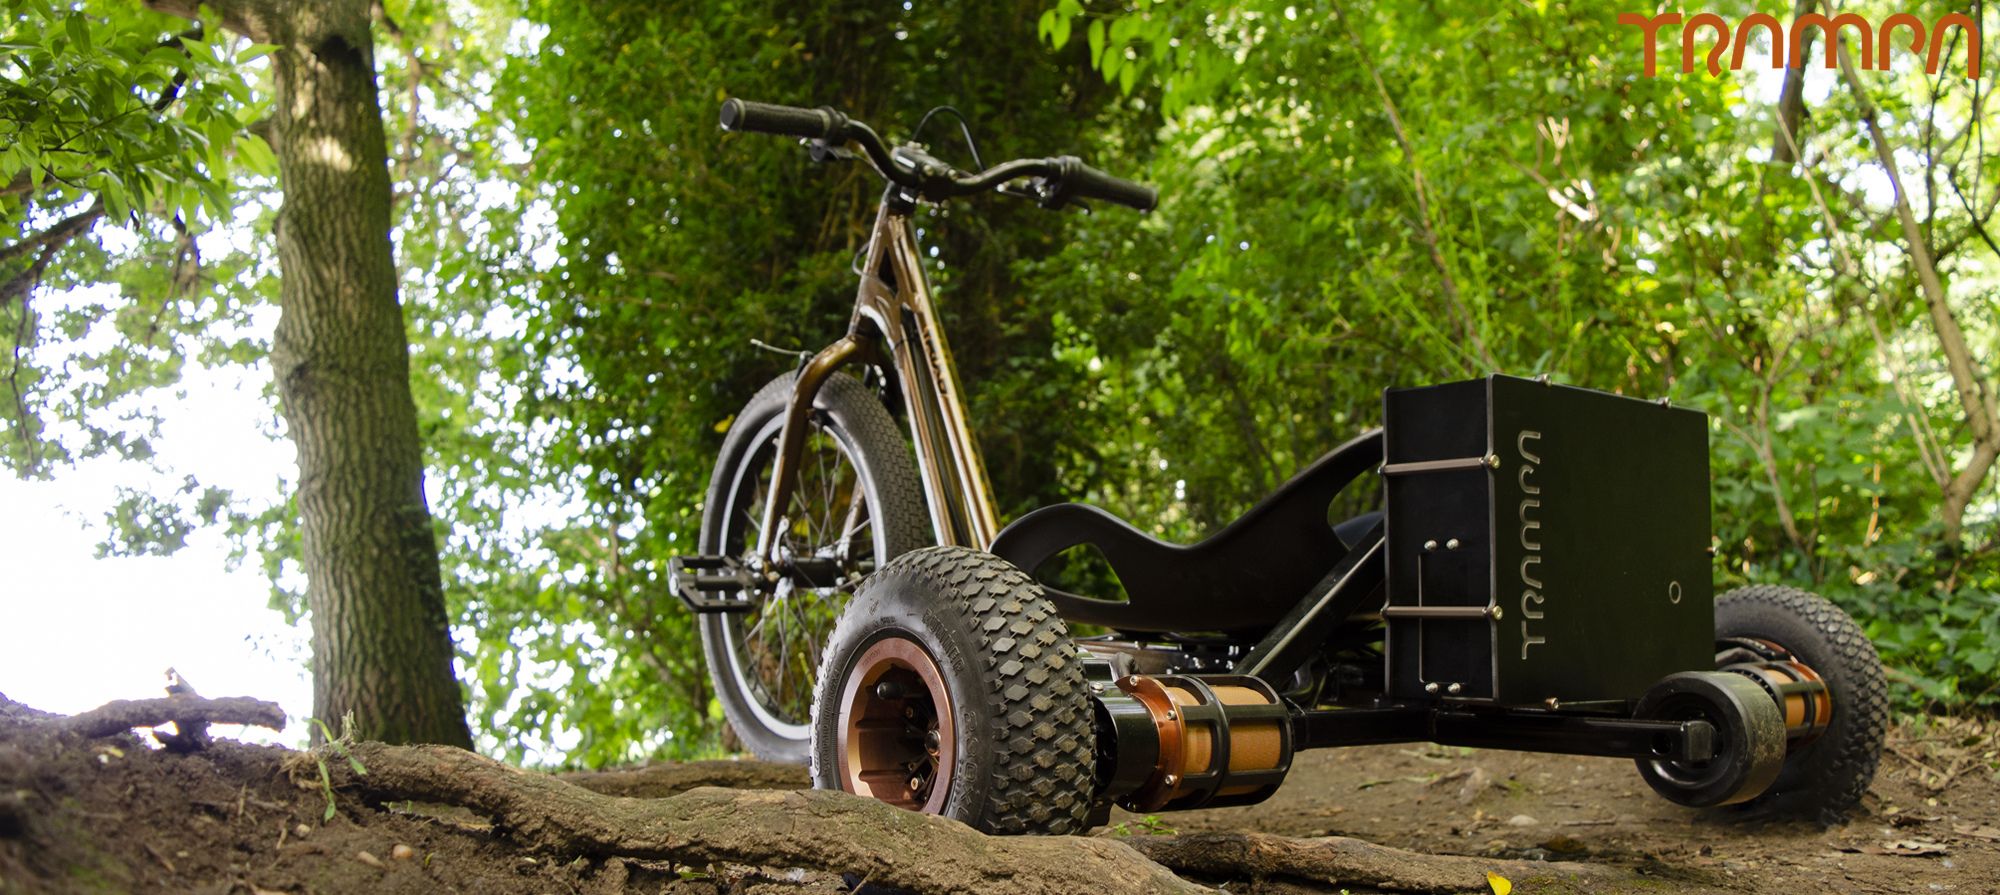 Electric TRIKE - TRAMPA's Dirt-E-Trike - CUSTOM build your Trike! If you already have a TRAMPA, you can exchange your batteries, wheels, charger from Board to Trike to keep costs down